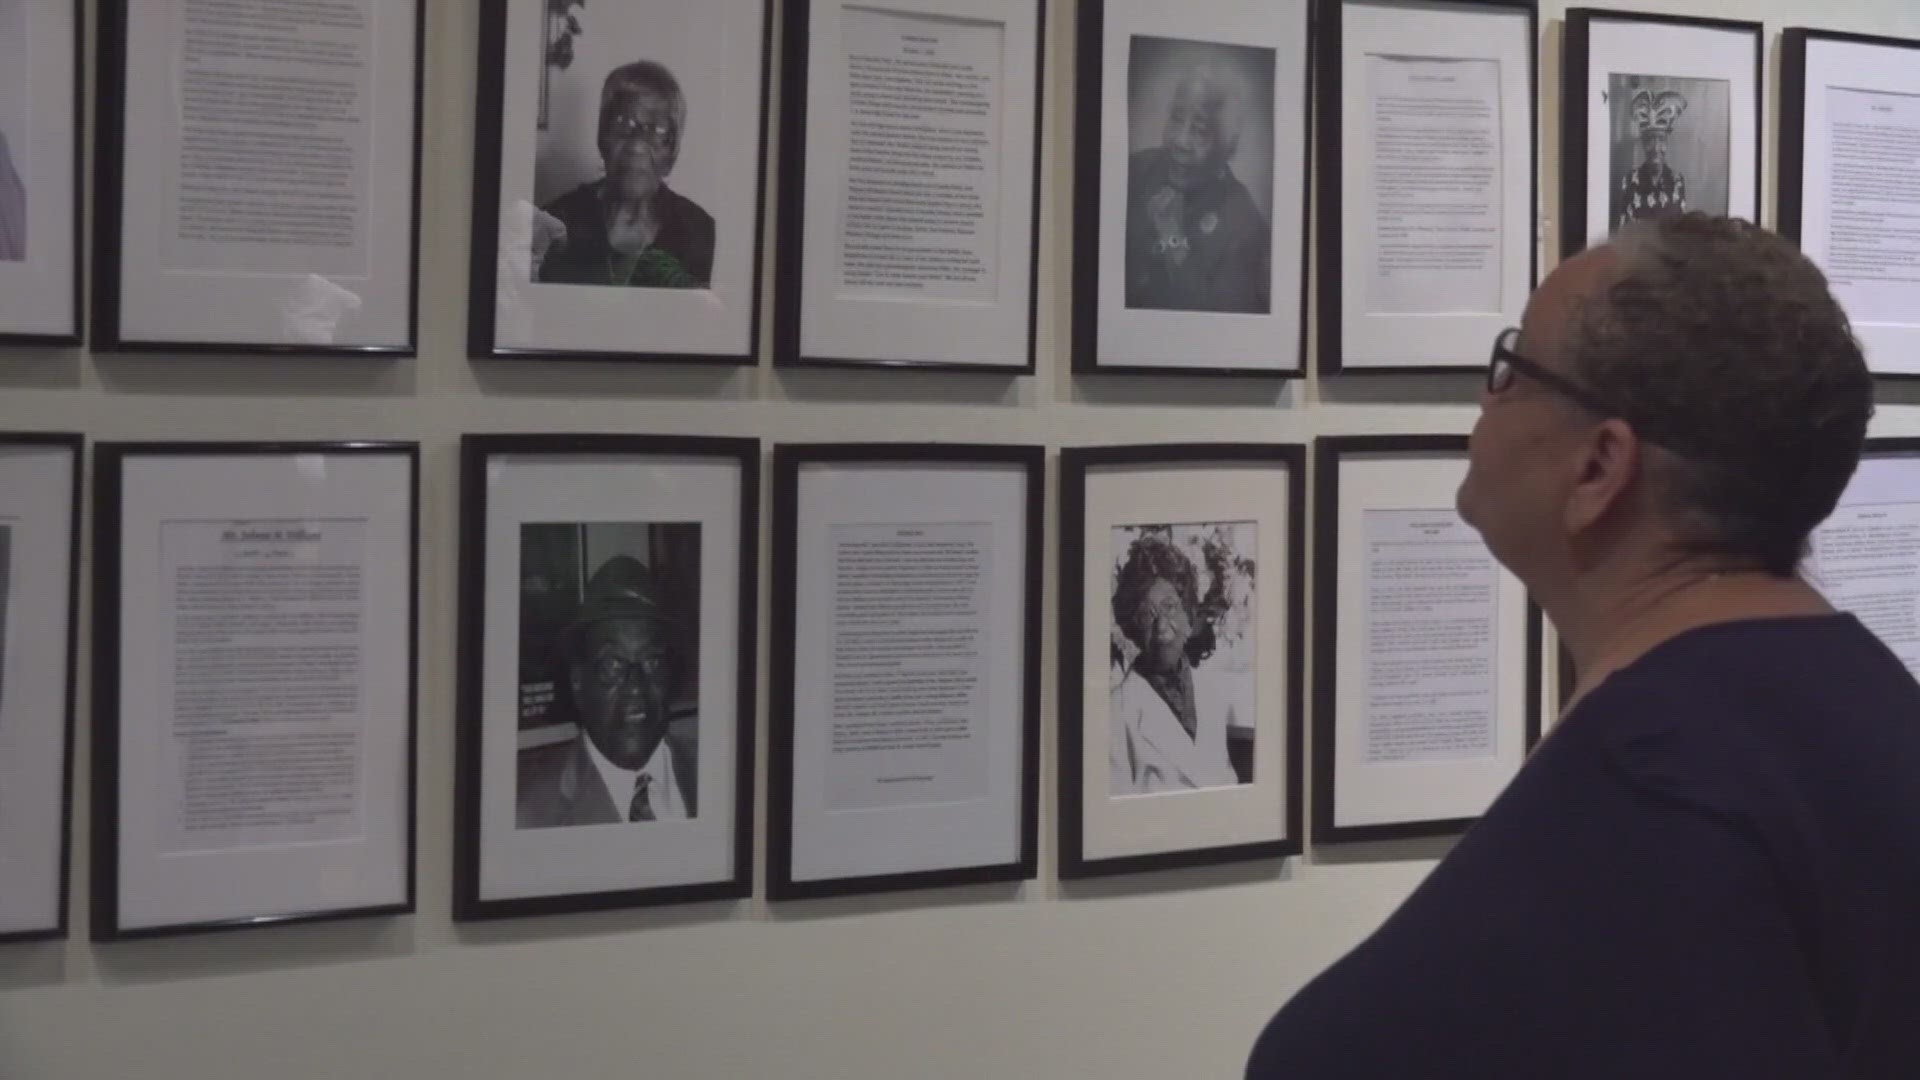 There are new exhibits on the civil rights era, as well as older features on influential Brazos Valley educators.